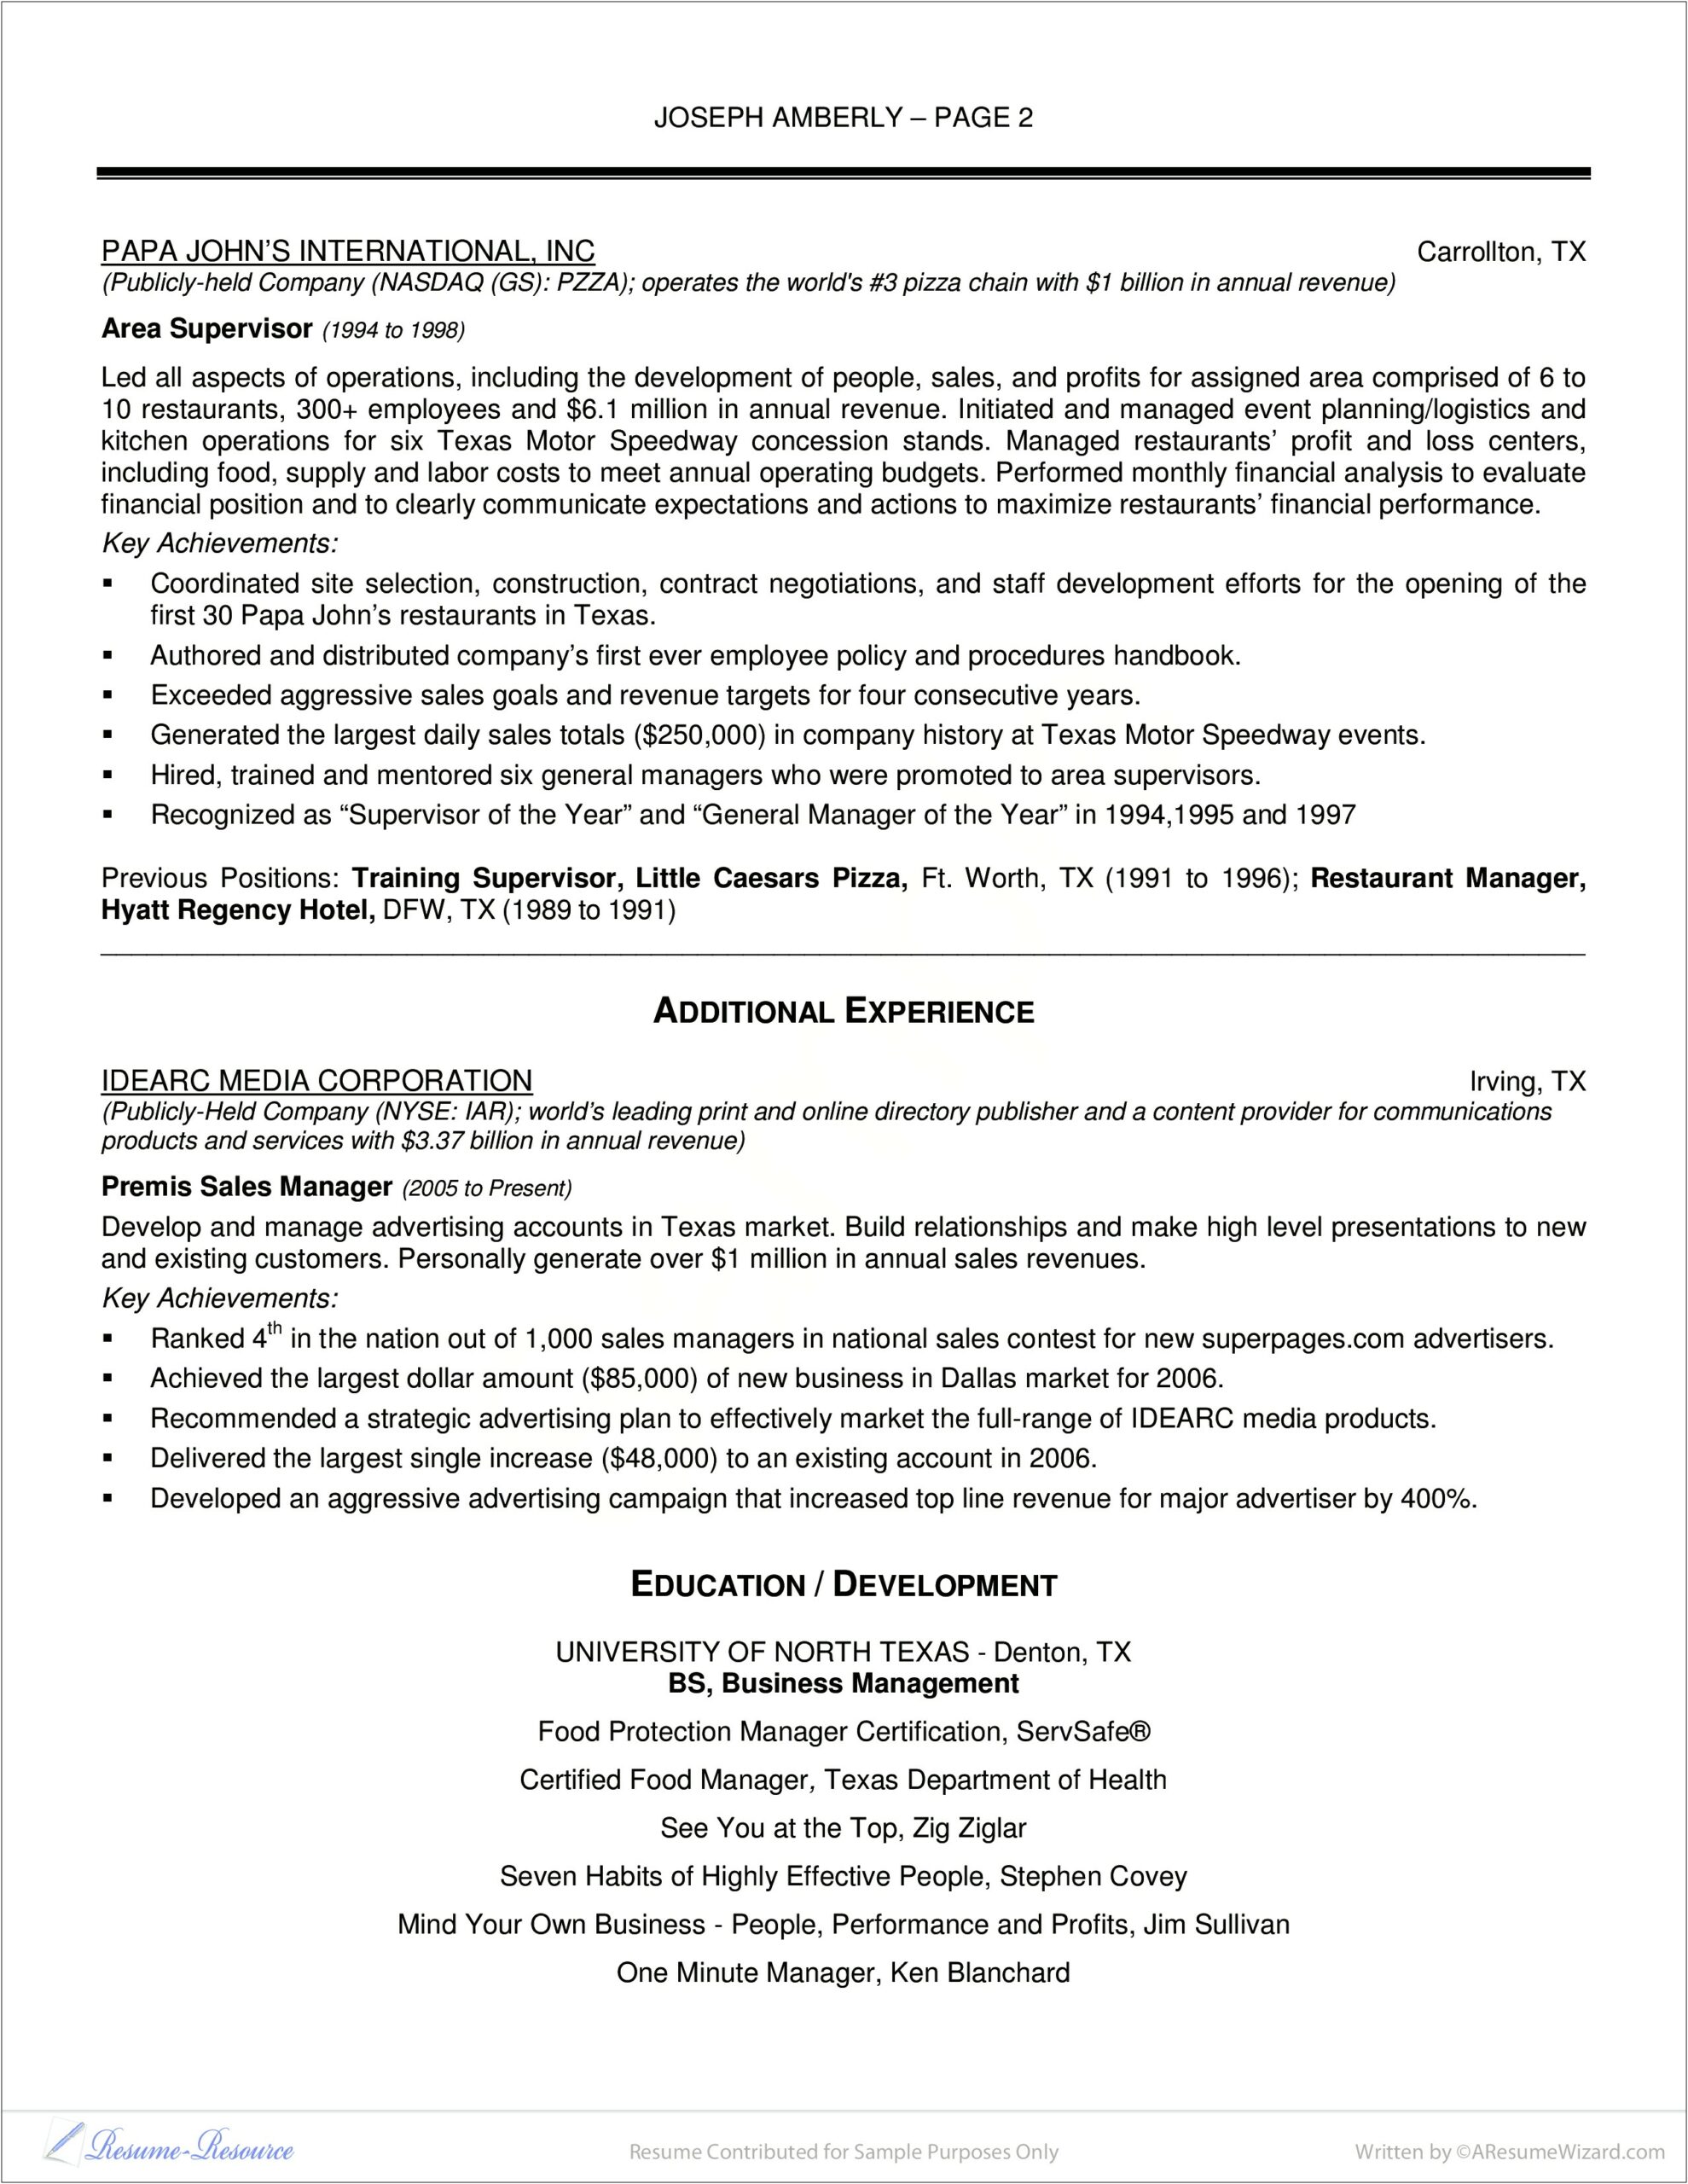 Objective Of Hotel And Restaurant Management Resume